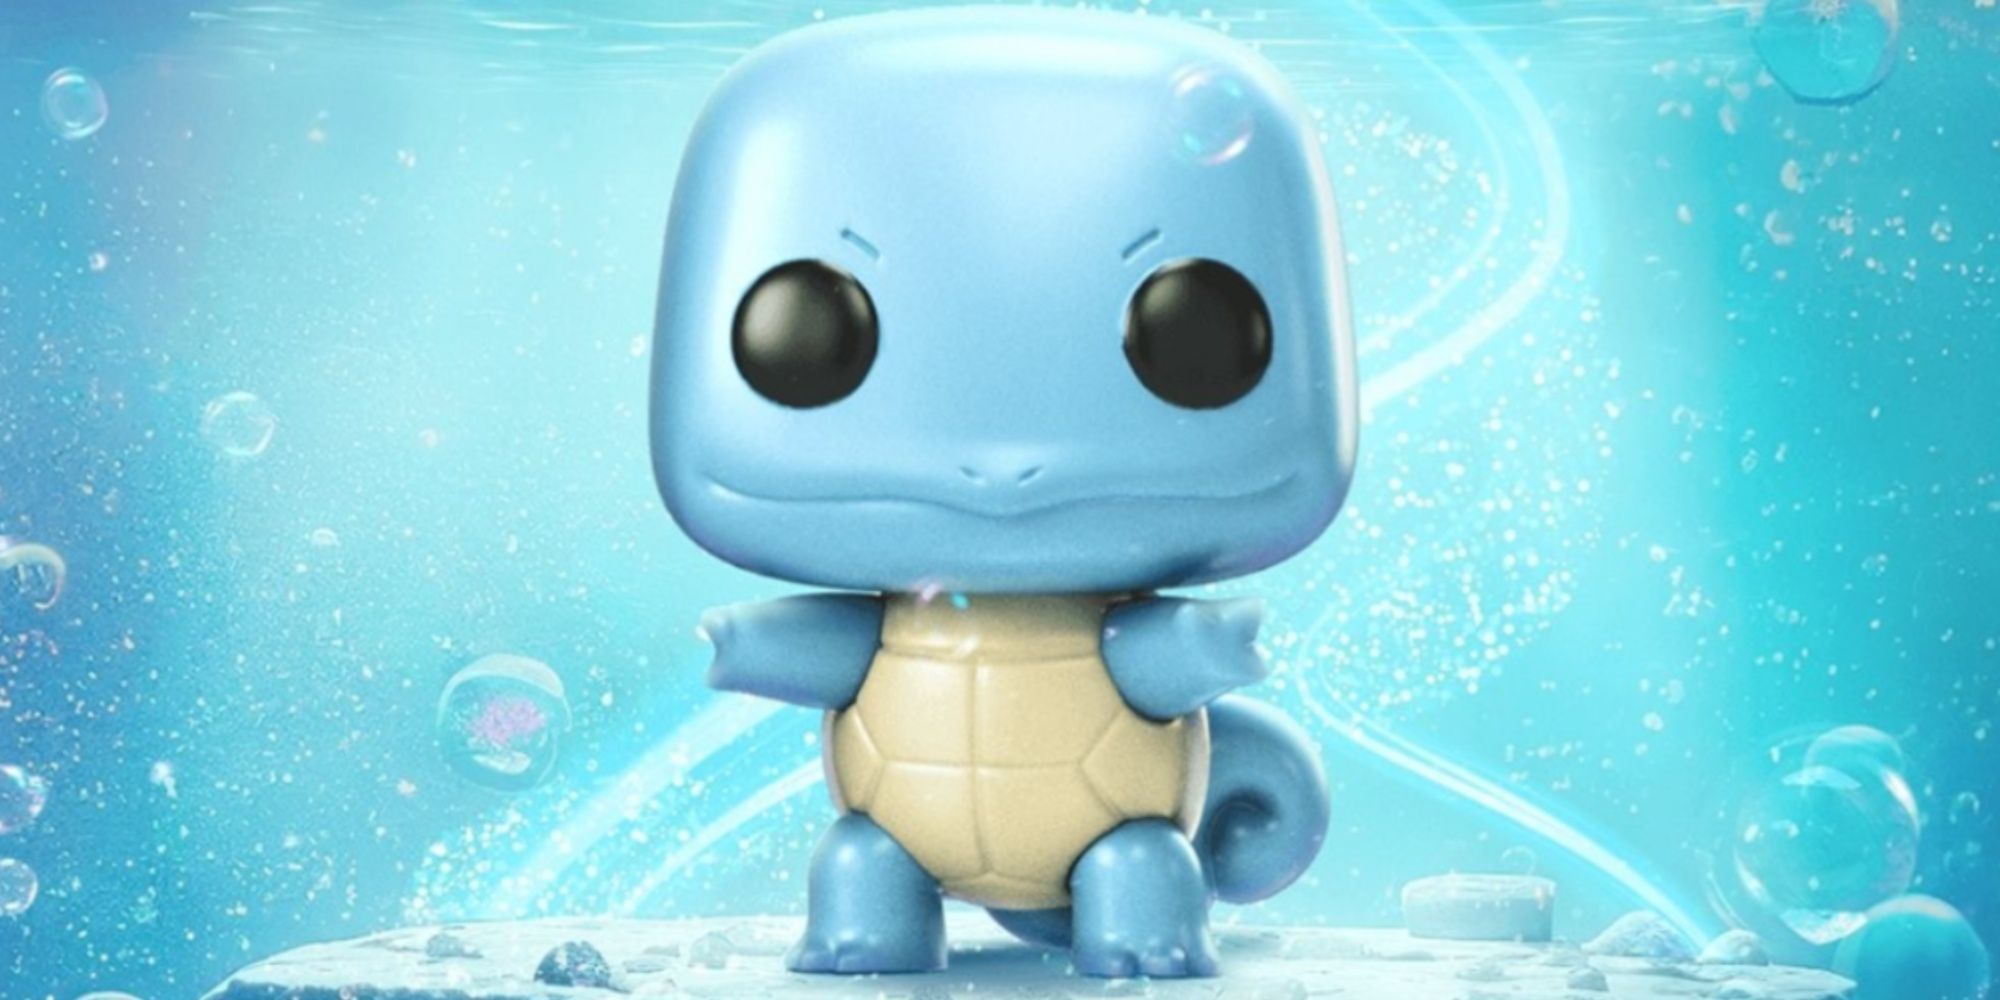 Pokemon's Pearlescent Squirtle Funko Pop Is Up For Pre-Order